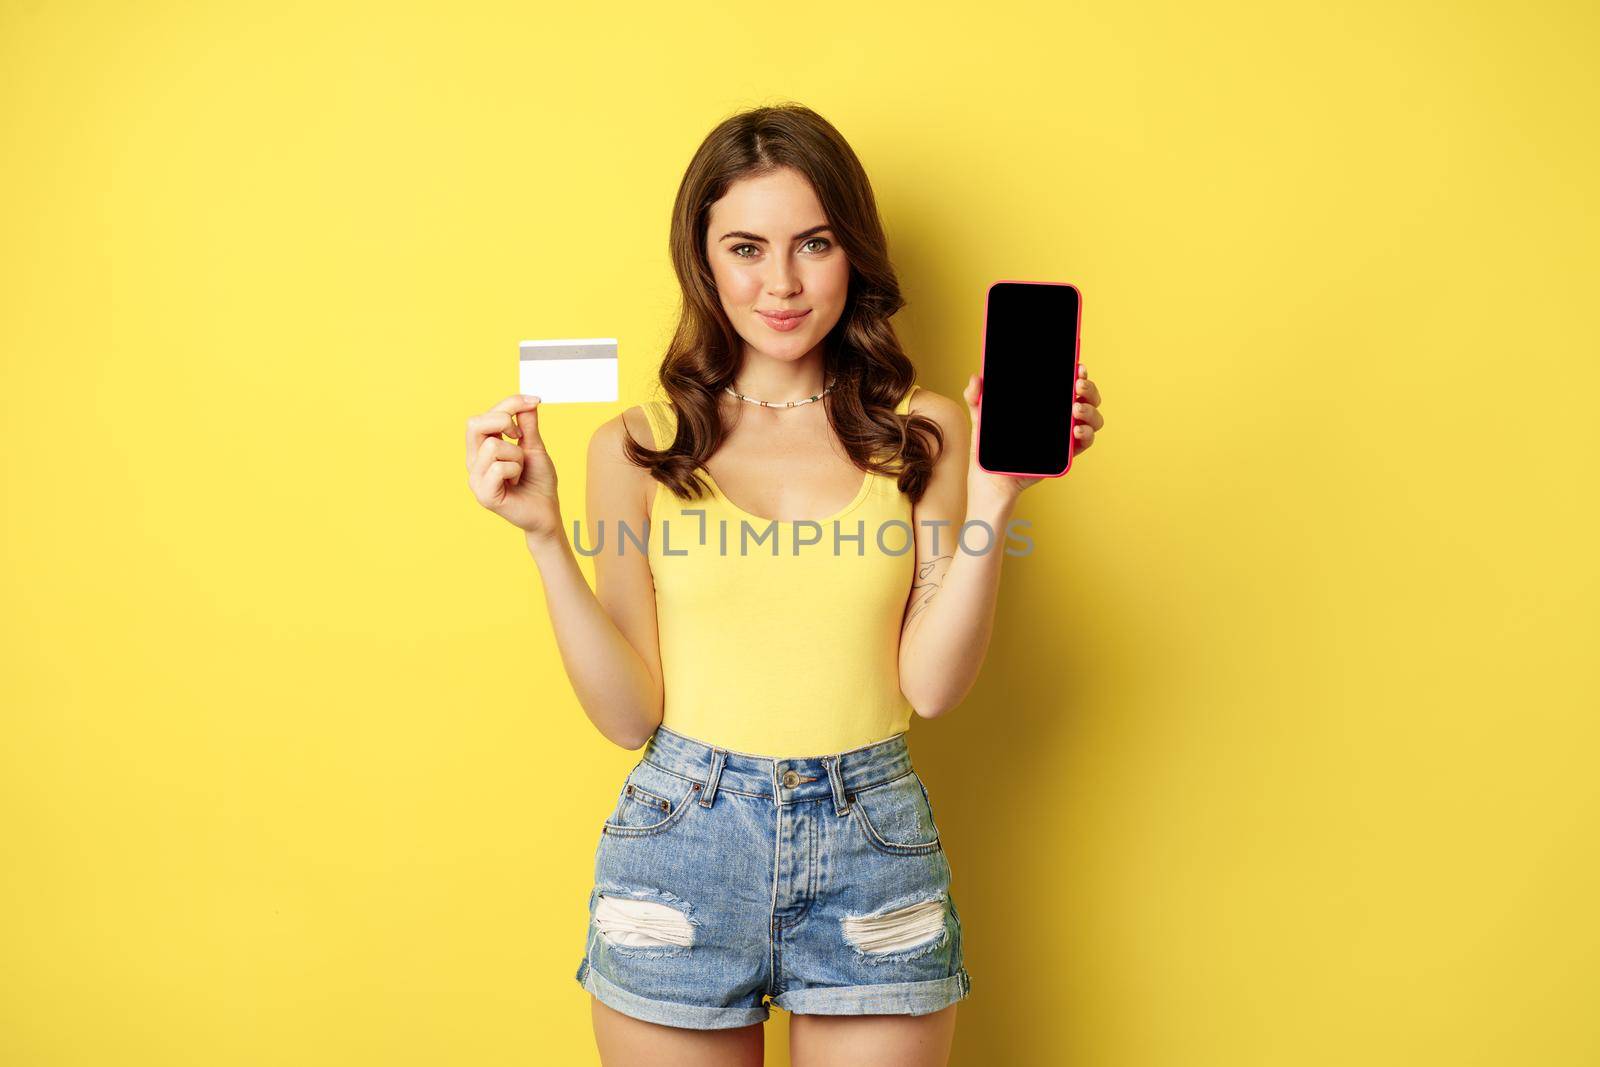 Young beautiful woman model showing smartphone empty phone screen and credit card, ready for summer, wearing tank top and shorts, standing over yellow background.